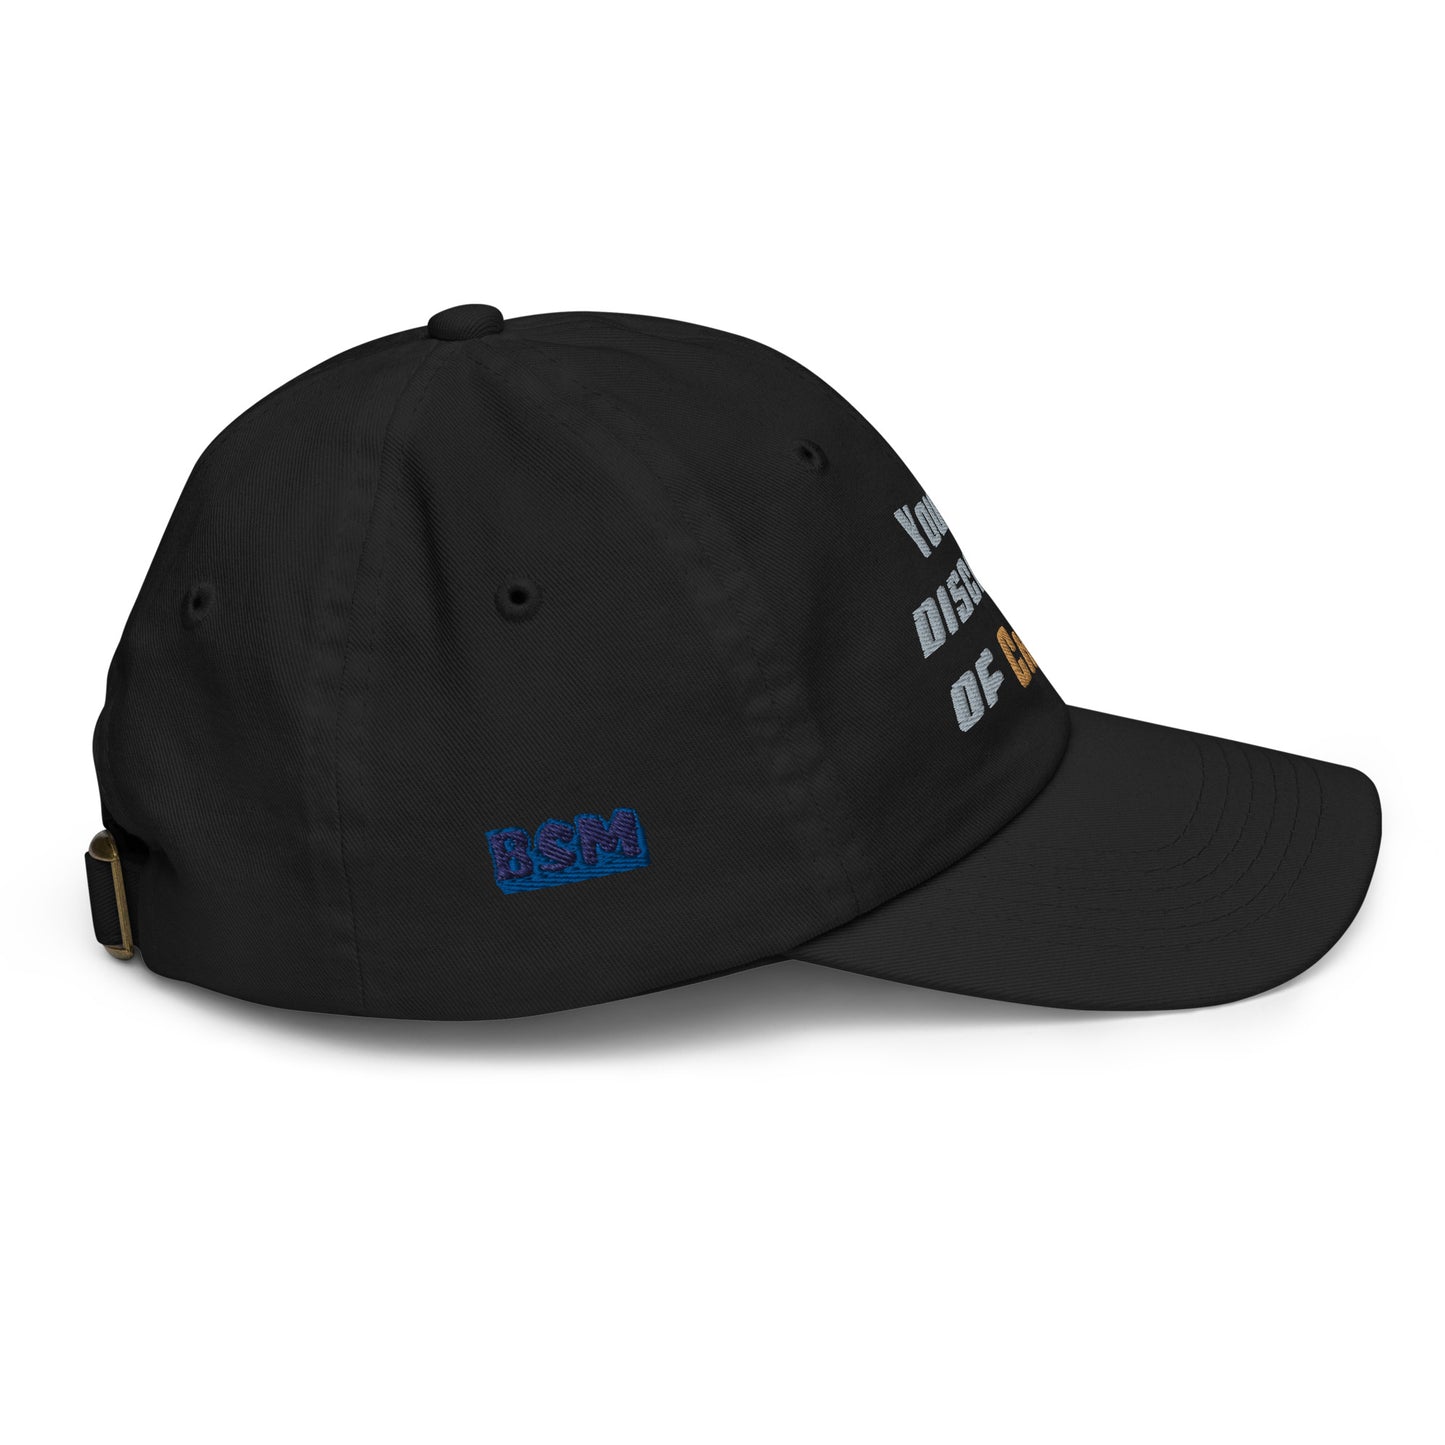 Young Disciples of Christ Youth Baseball Cap